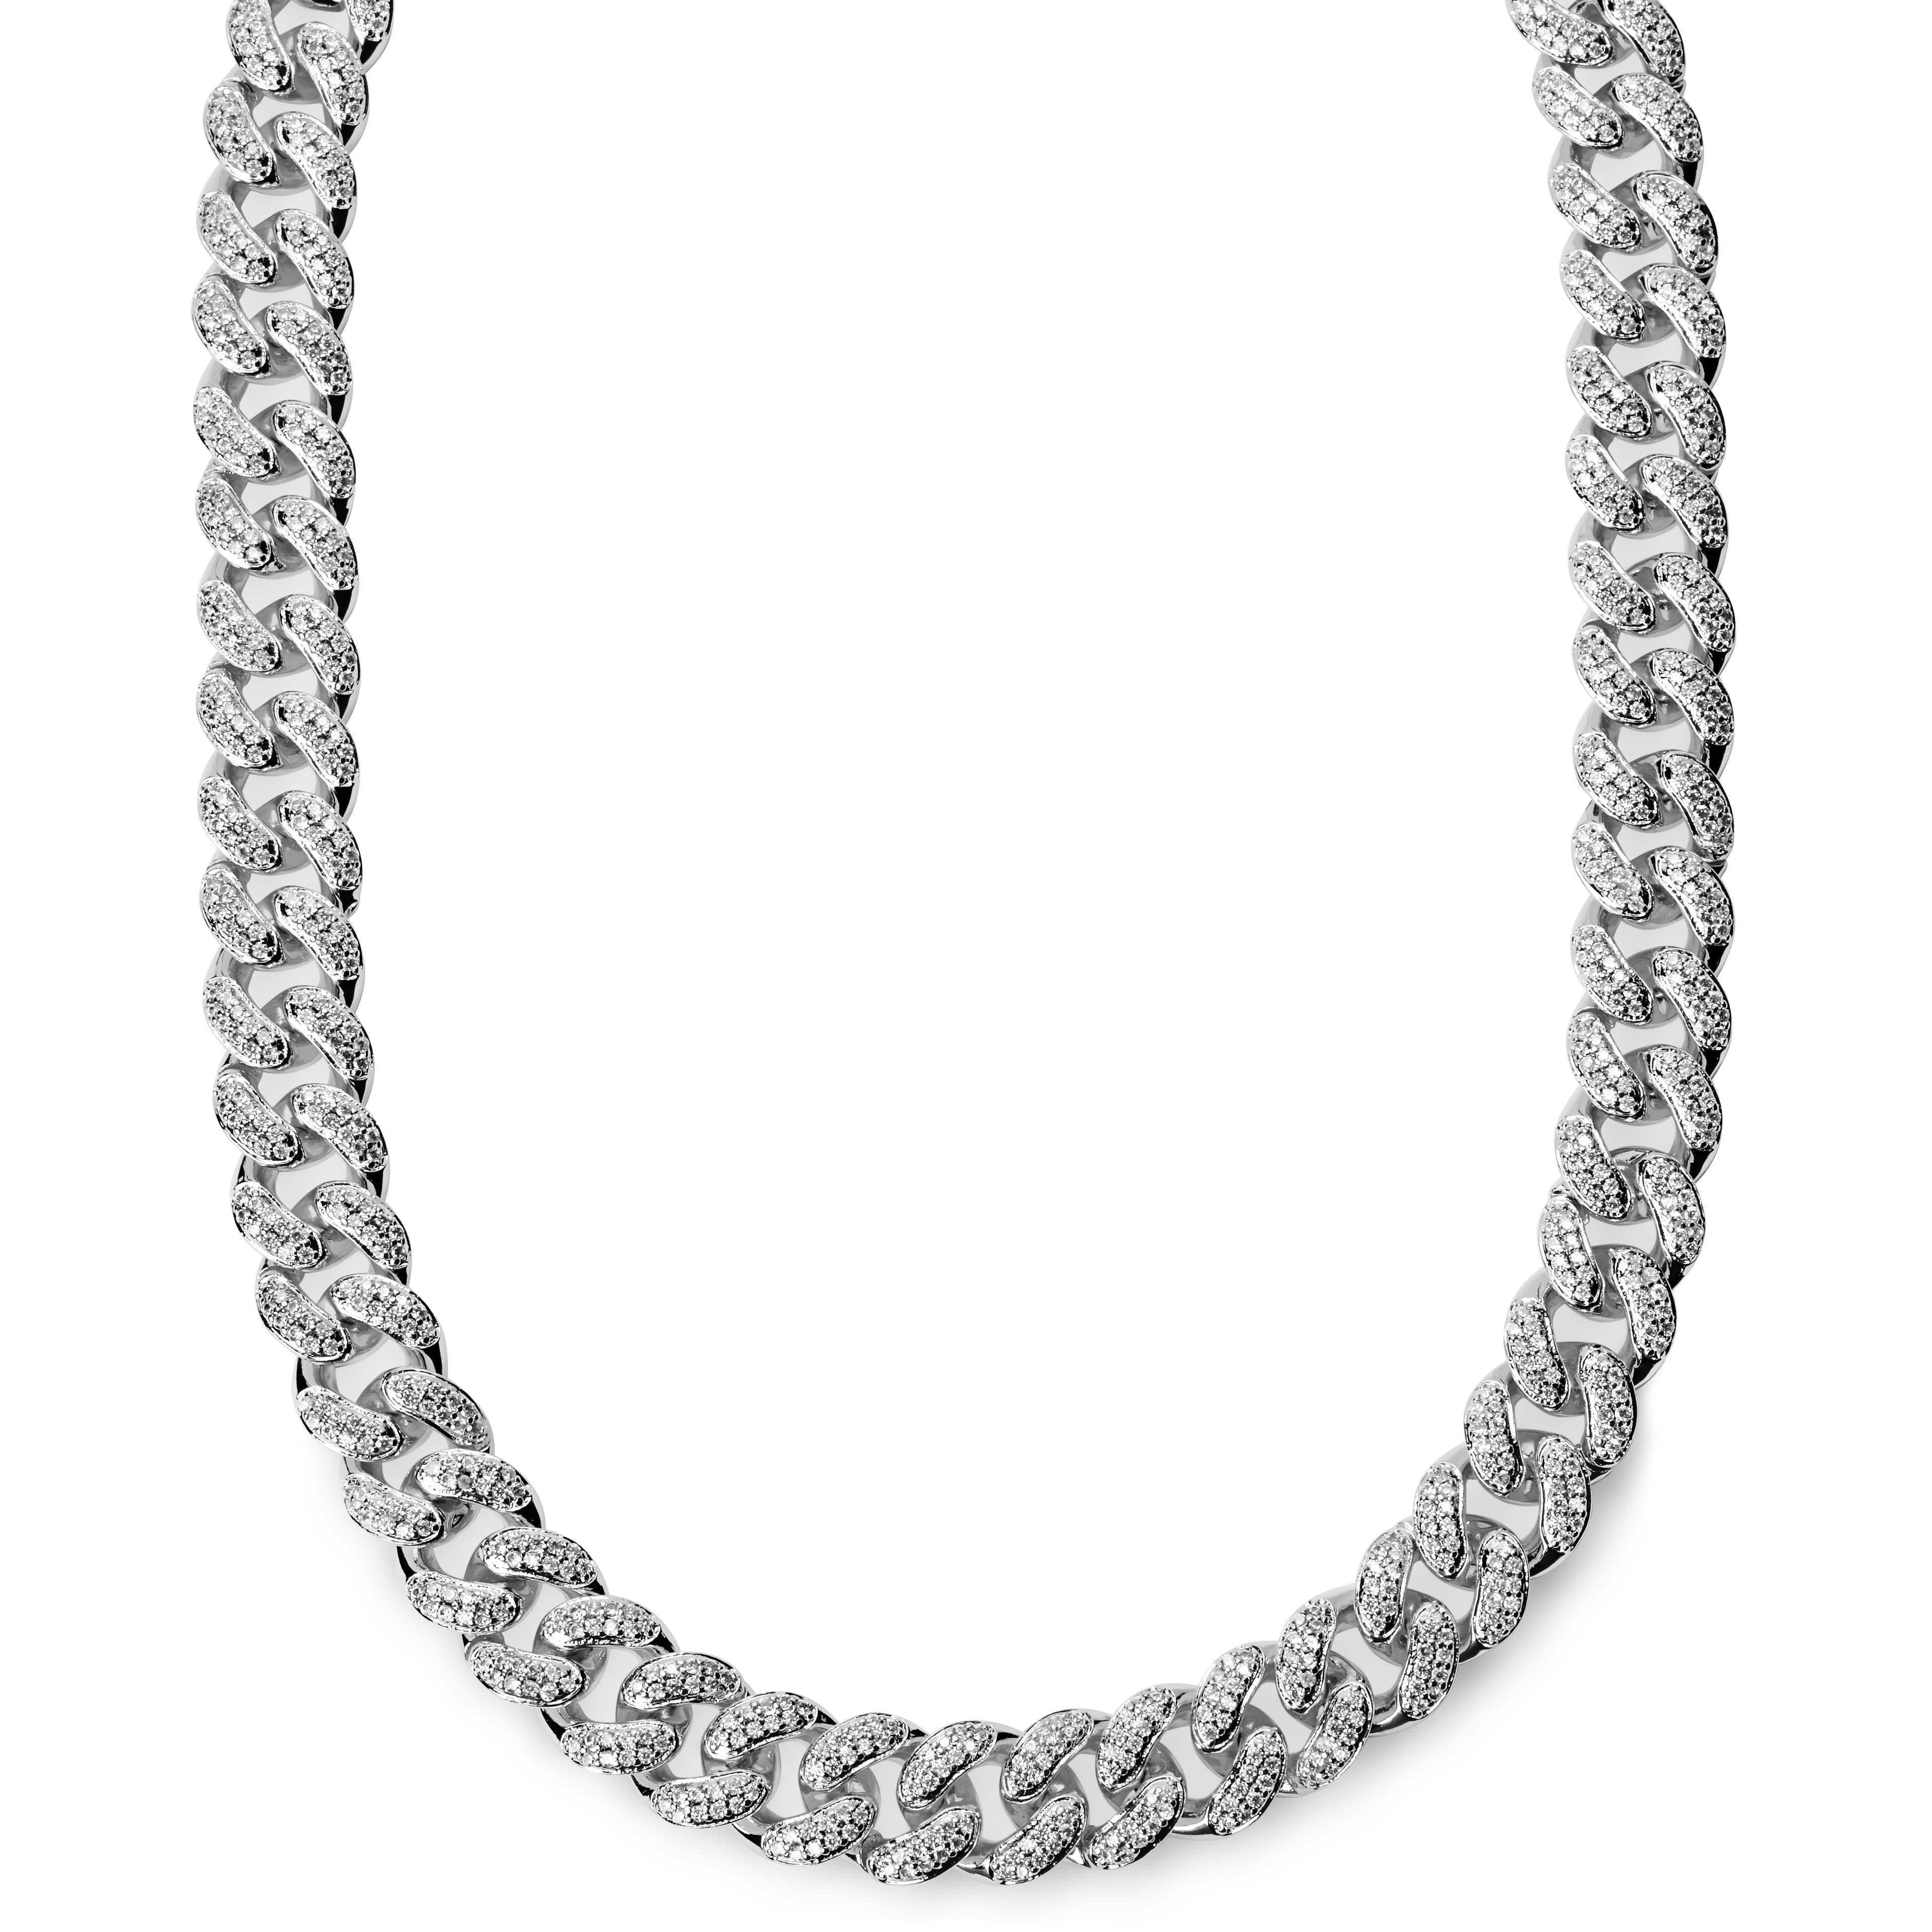 Nicos | 1/2" (12 mm) Iced Silver-tone Cuban Chain Zirconia Necklace